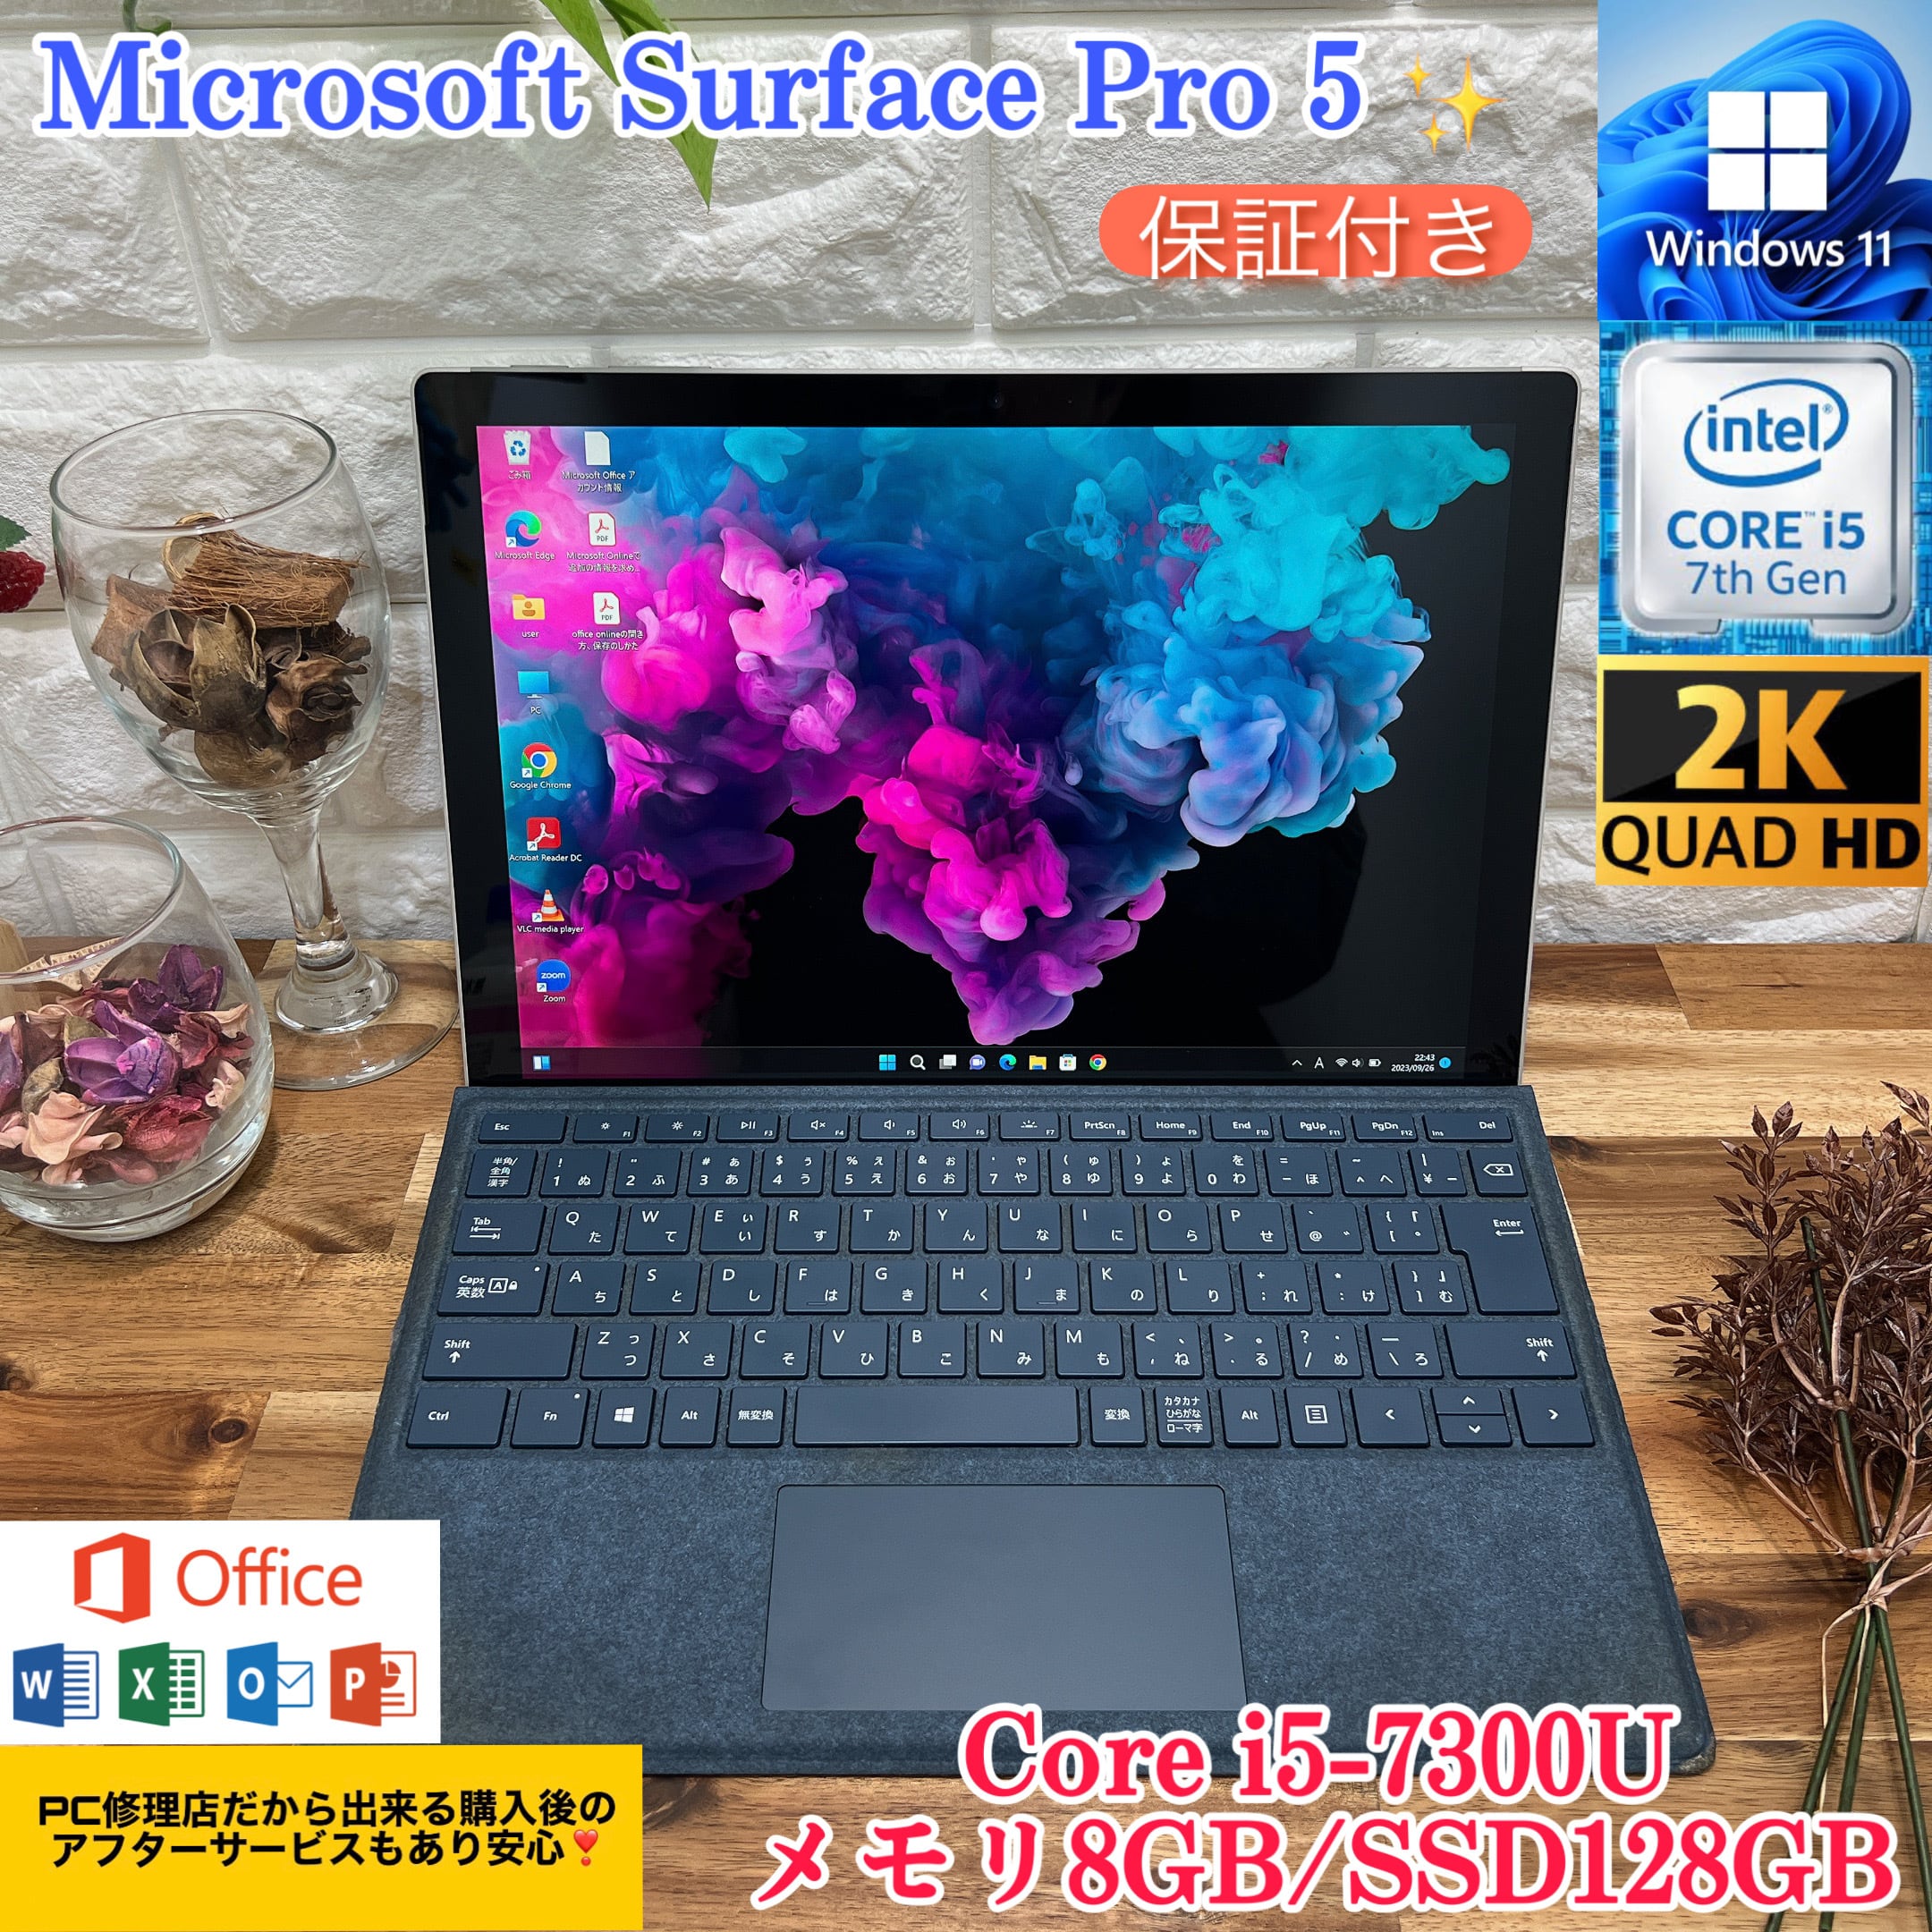 Microsoft Surface Pro 5 | Core i5第7世代 - beaconparenting.ie